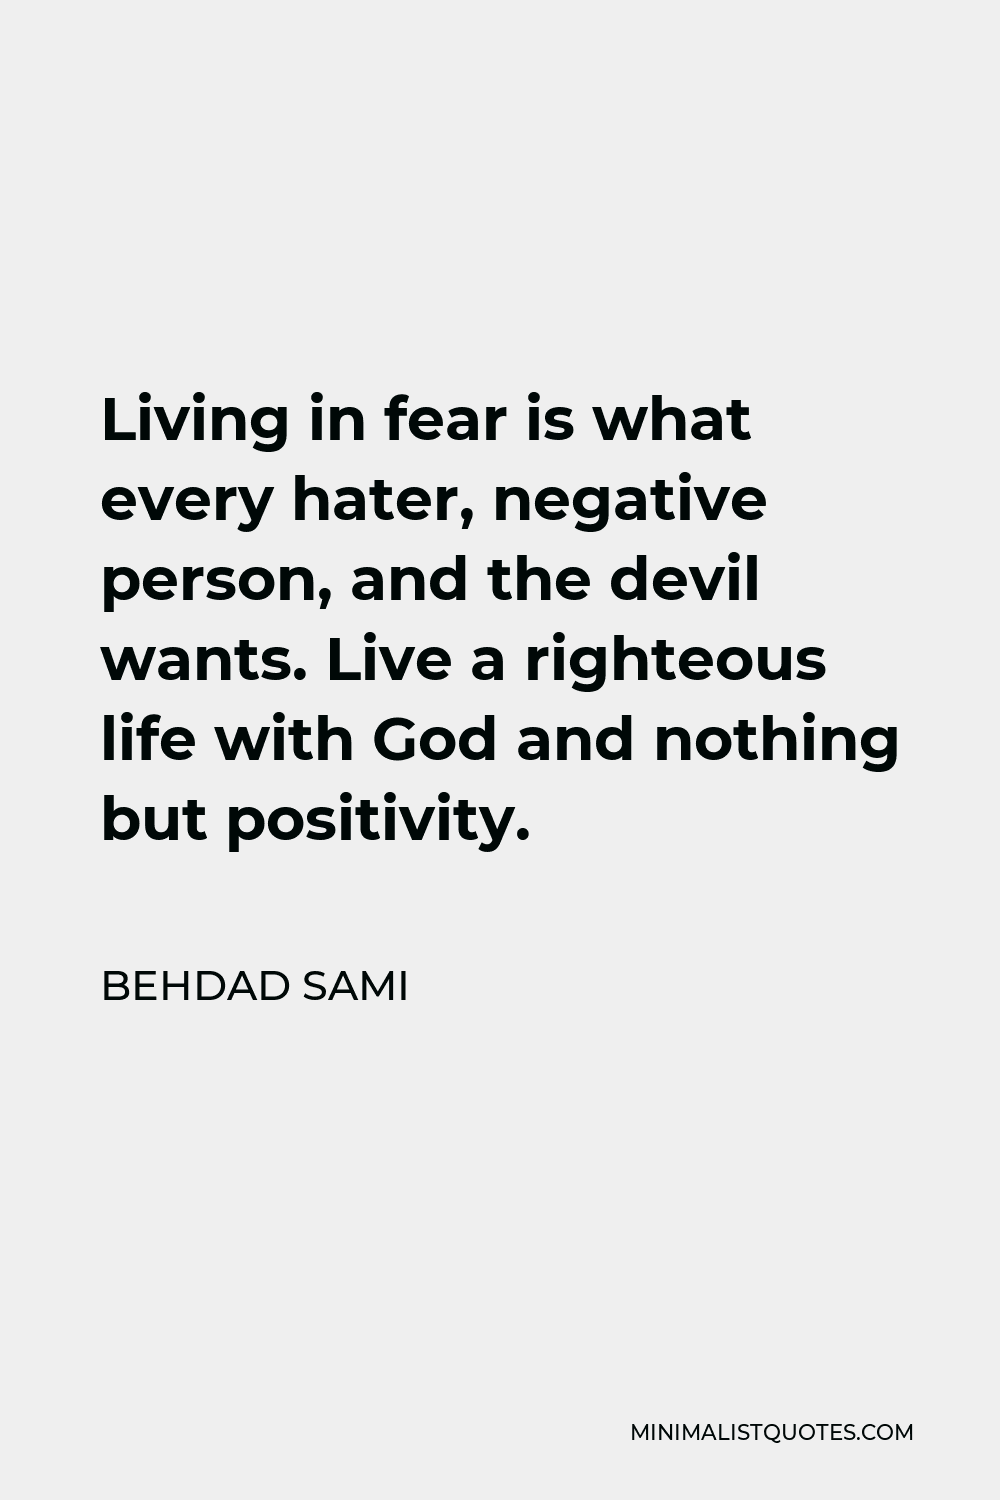 Behdad Sami Quote - Living in fear is what every hater, negative person, and the devil wants. Live a righteous life with God and nothing but positivity.